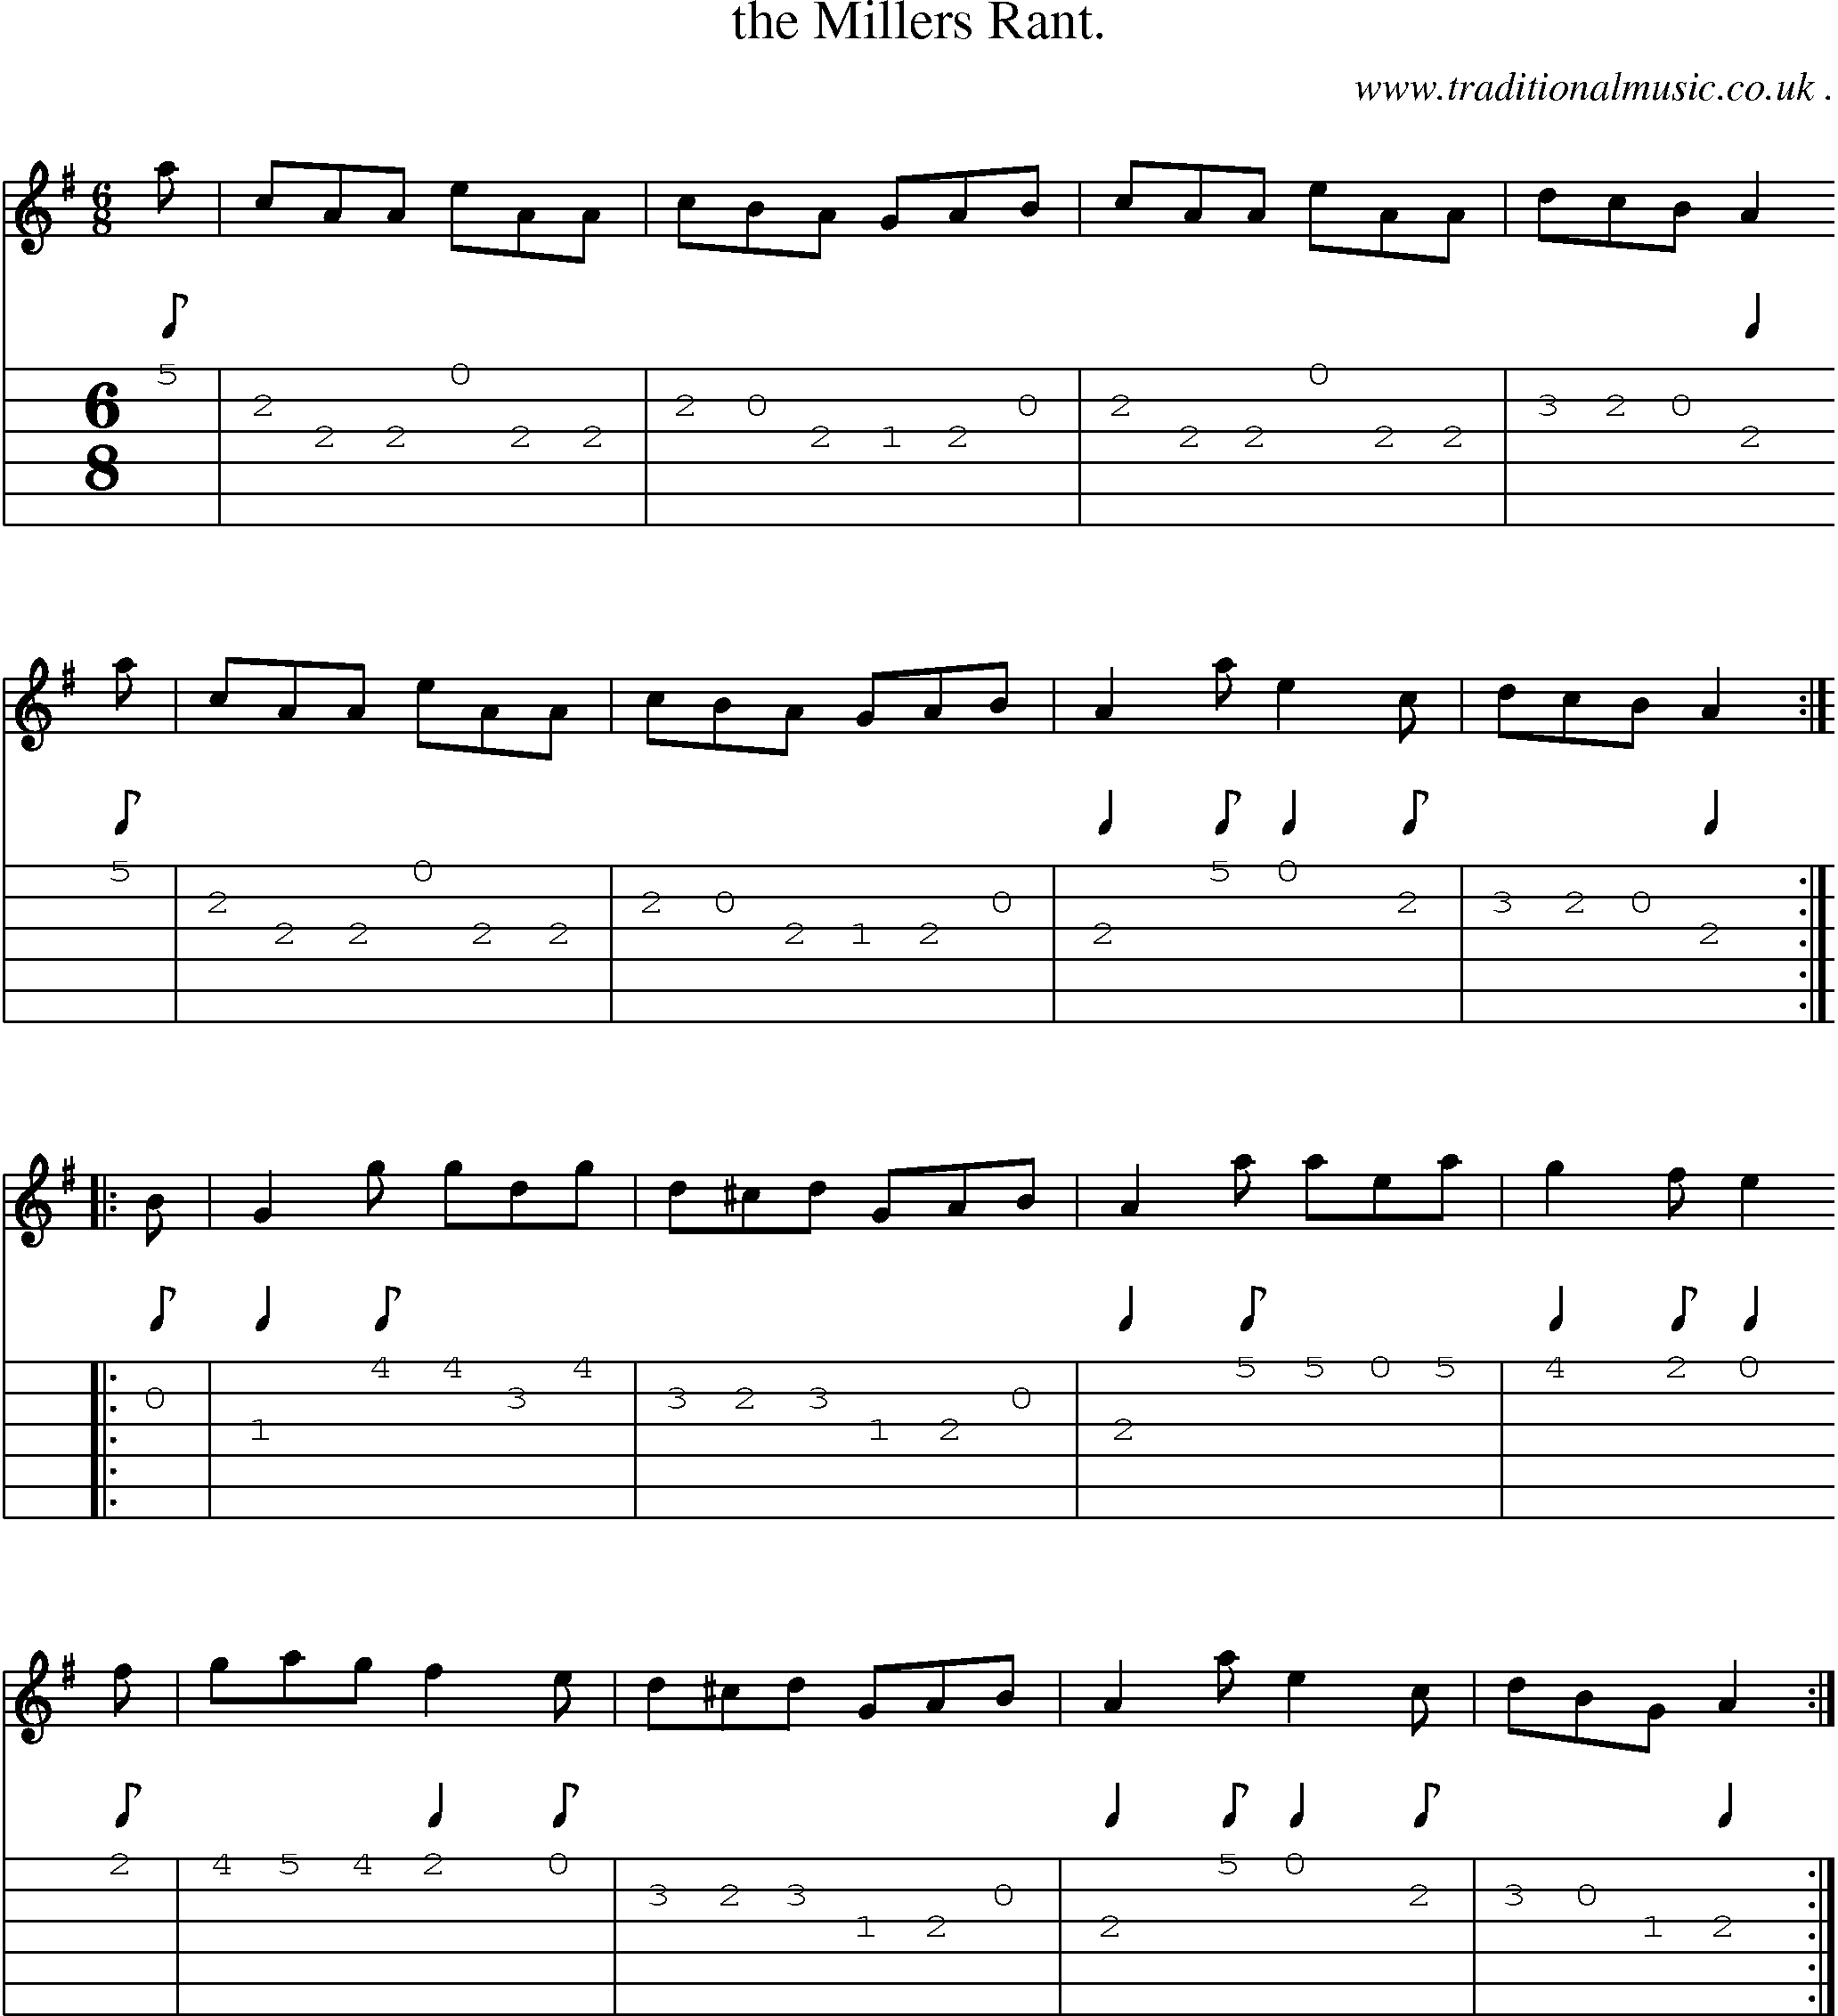 Sheet-Music and Guitar Tabs for The Millers Rant